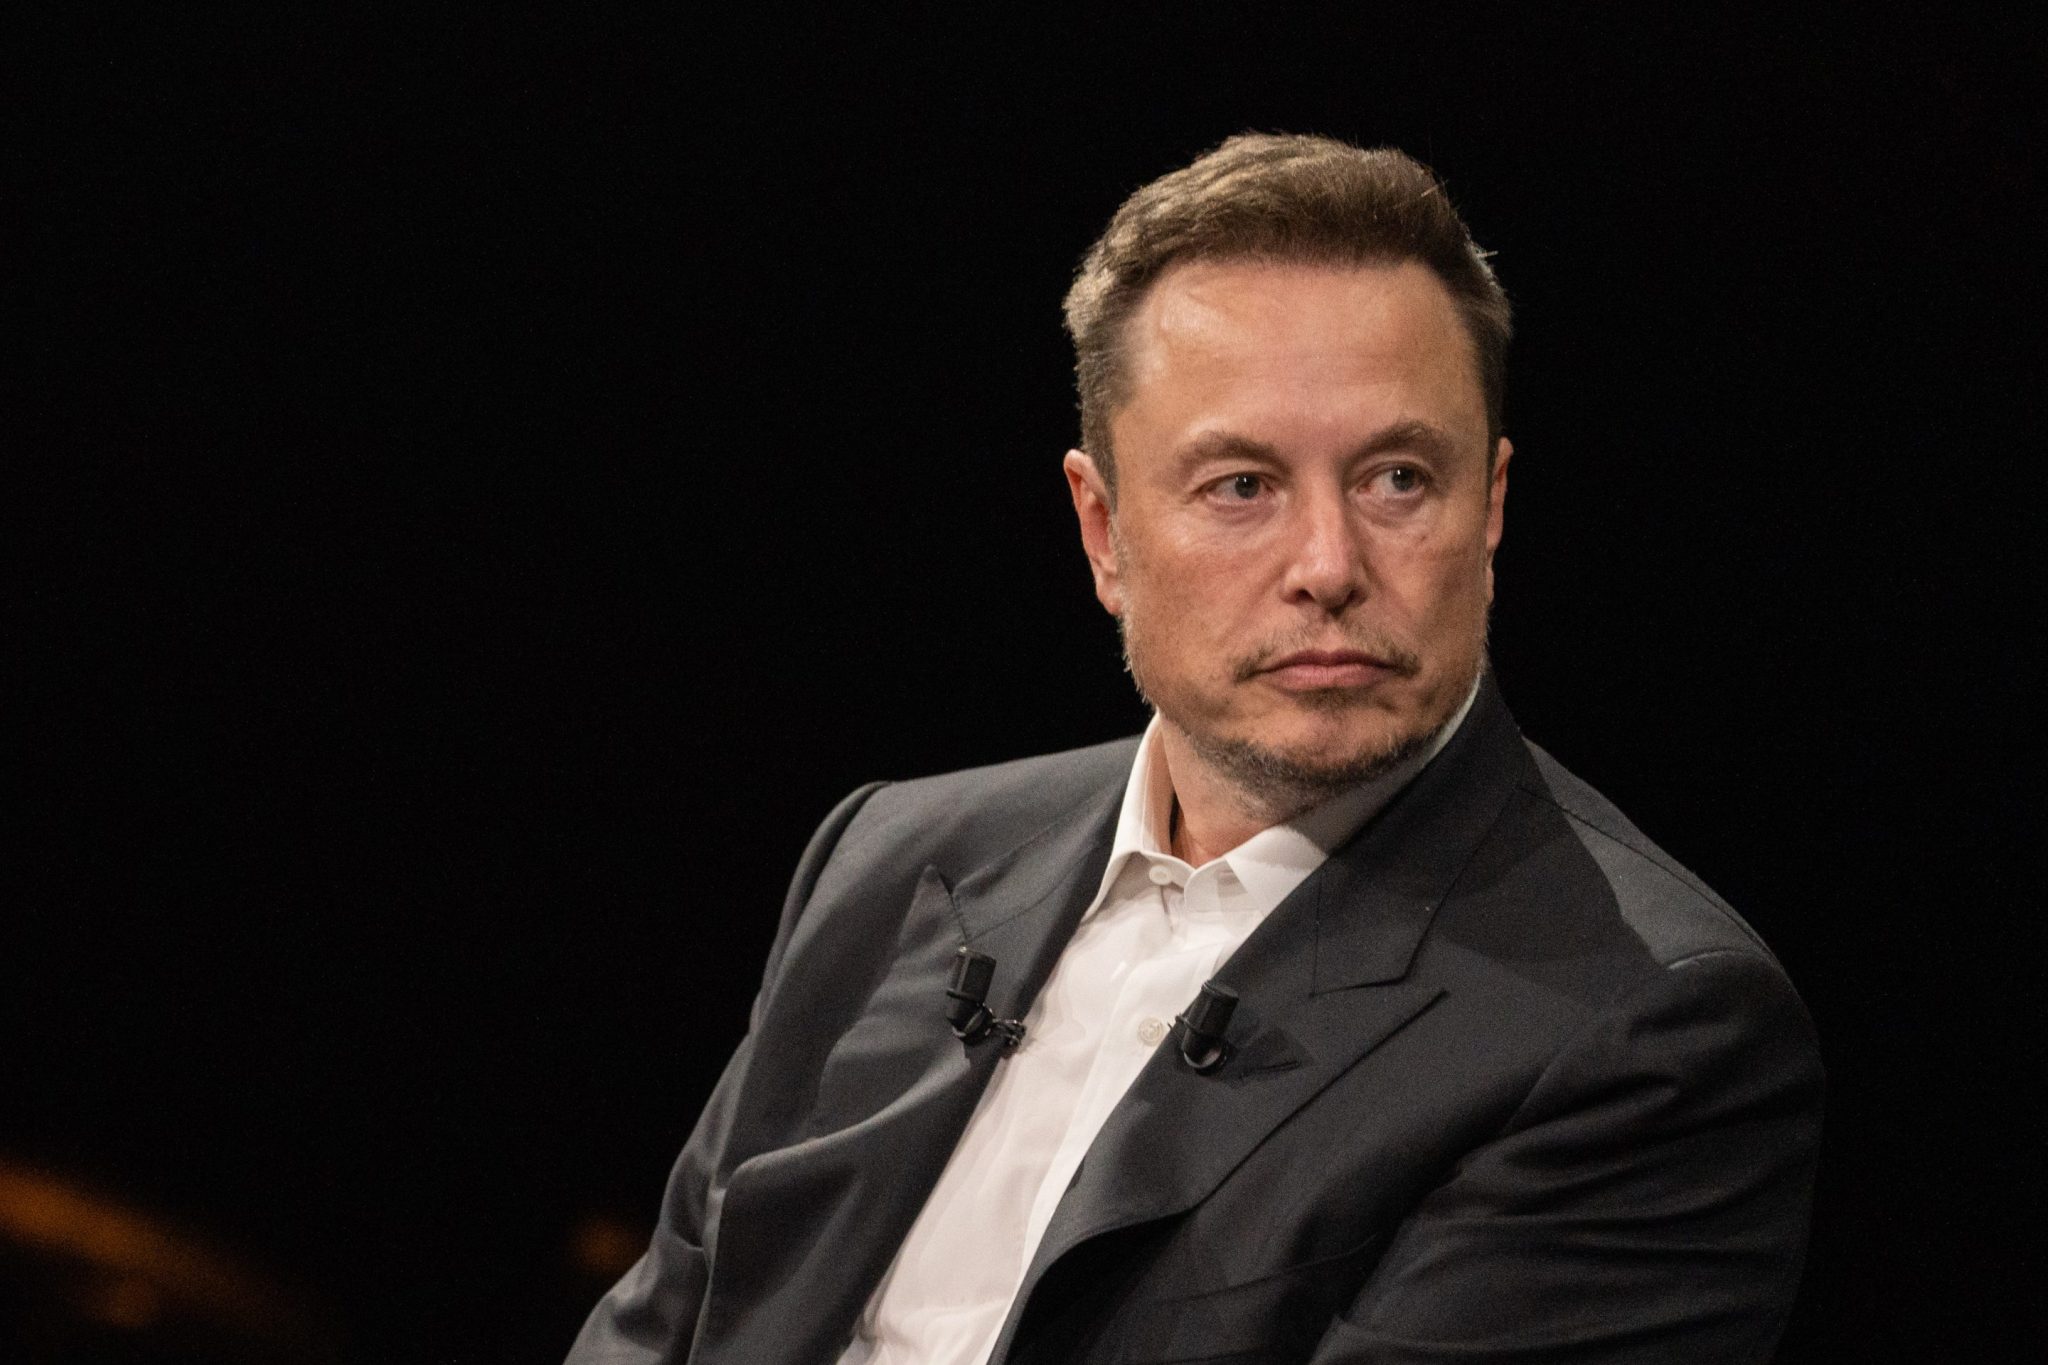 Government describes Twitter/X as “chaotic environment,” wants Musk to testify